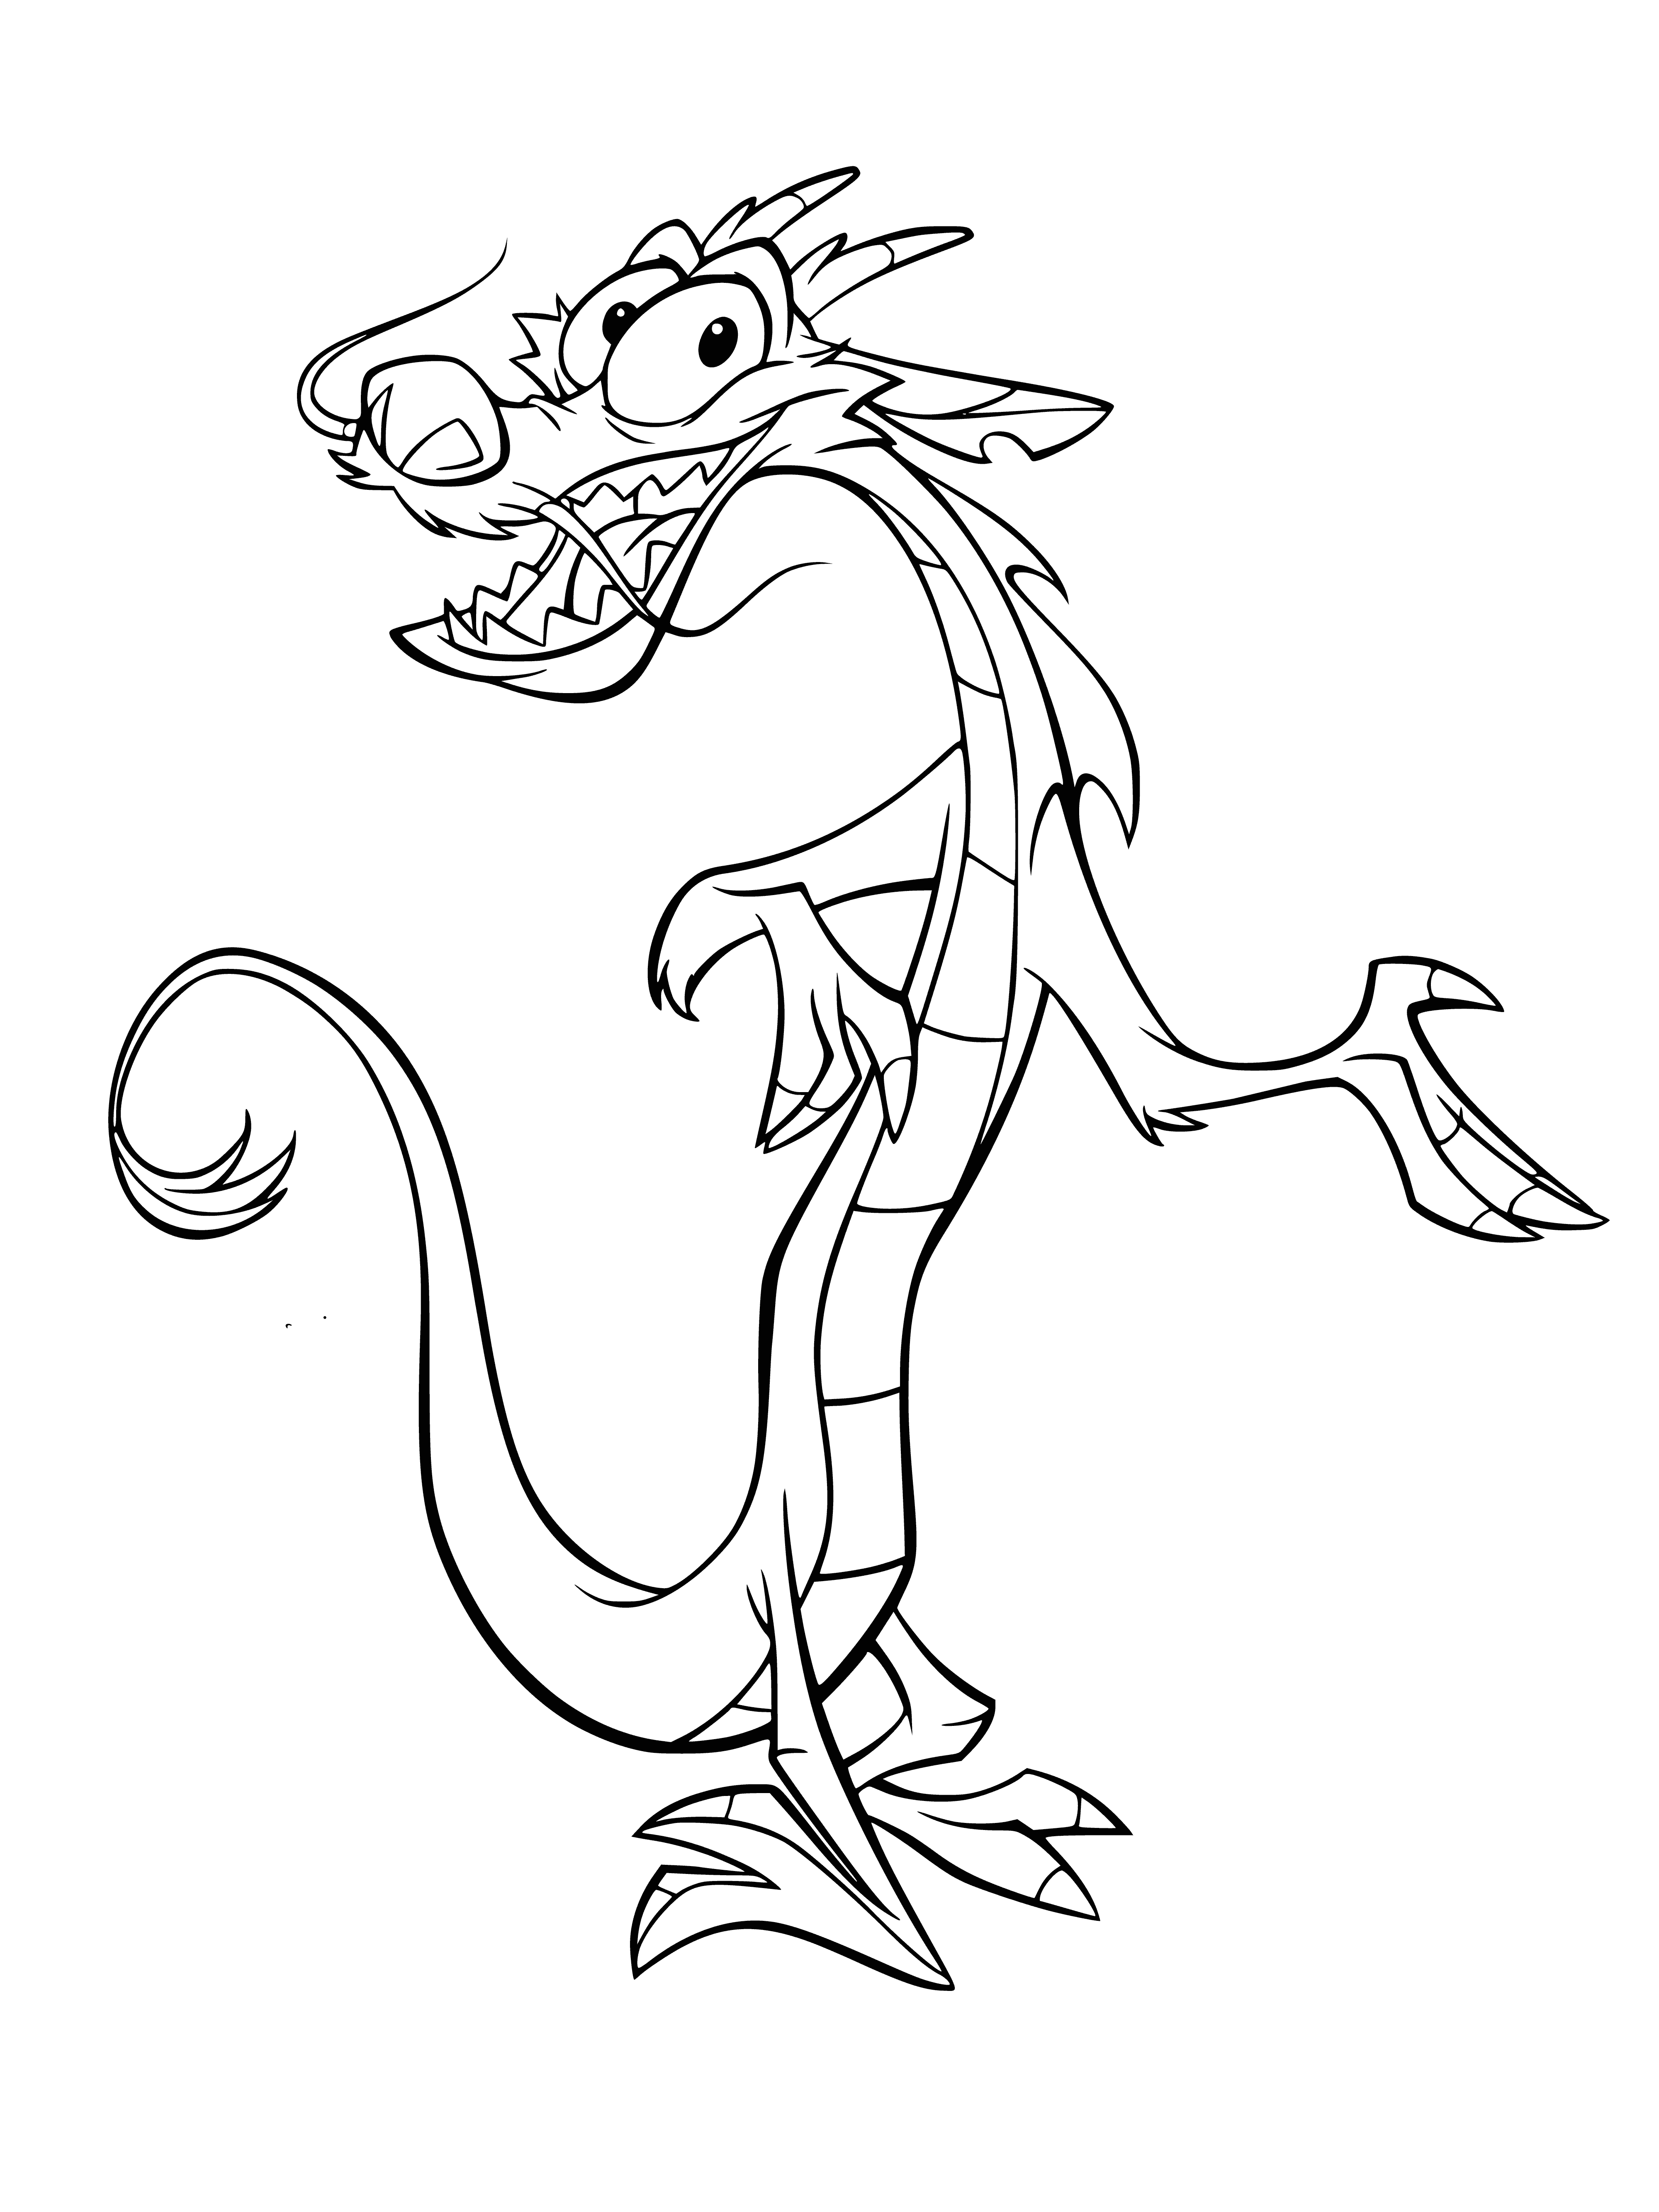 coloring page: Mushu is a small dragon-like creature with scaly skin, two wings, two horns, a long tongue, and sharp teeth.